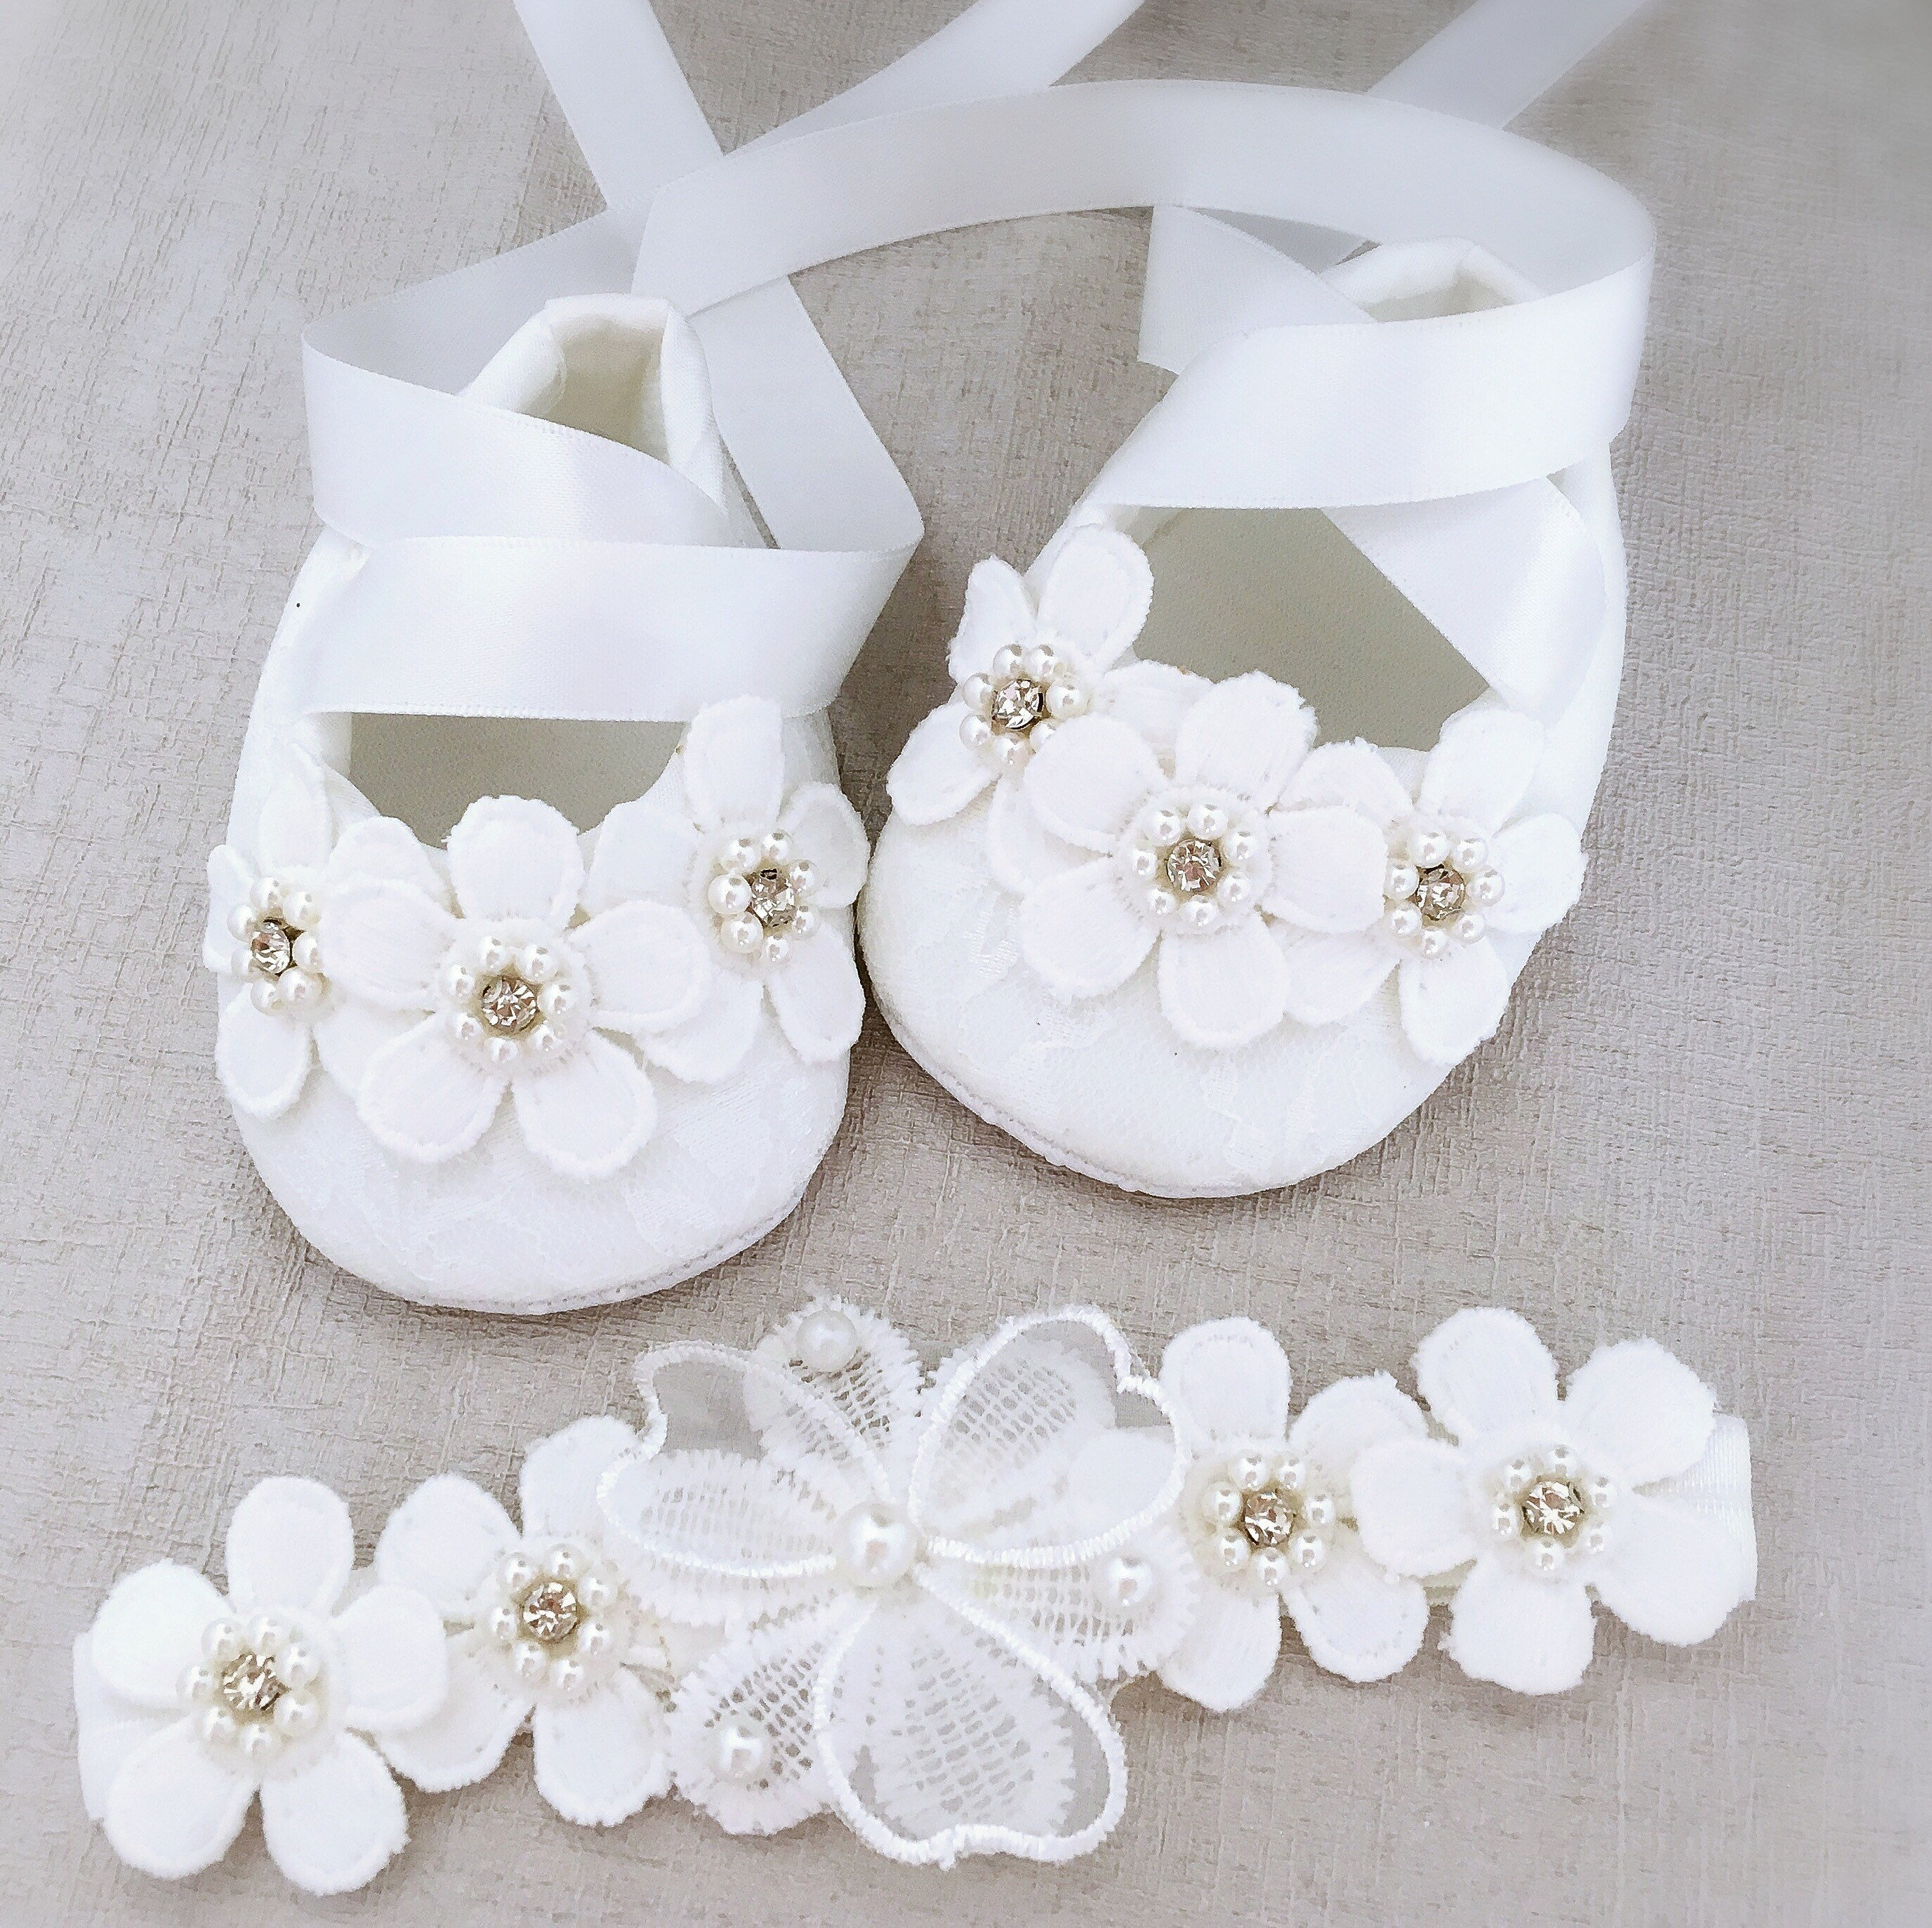 Satin Roses Shabby Flower Christening Shoes Baby Shower Gift Cluster of Pearls Lace Headband Girl White Baptism Shoes Daisy Flower